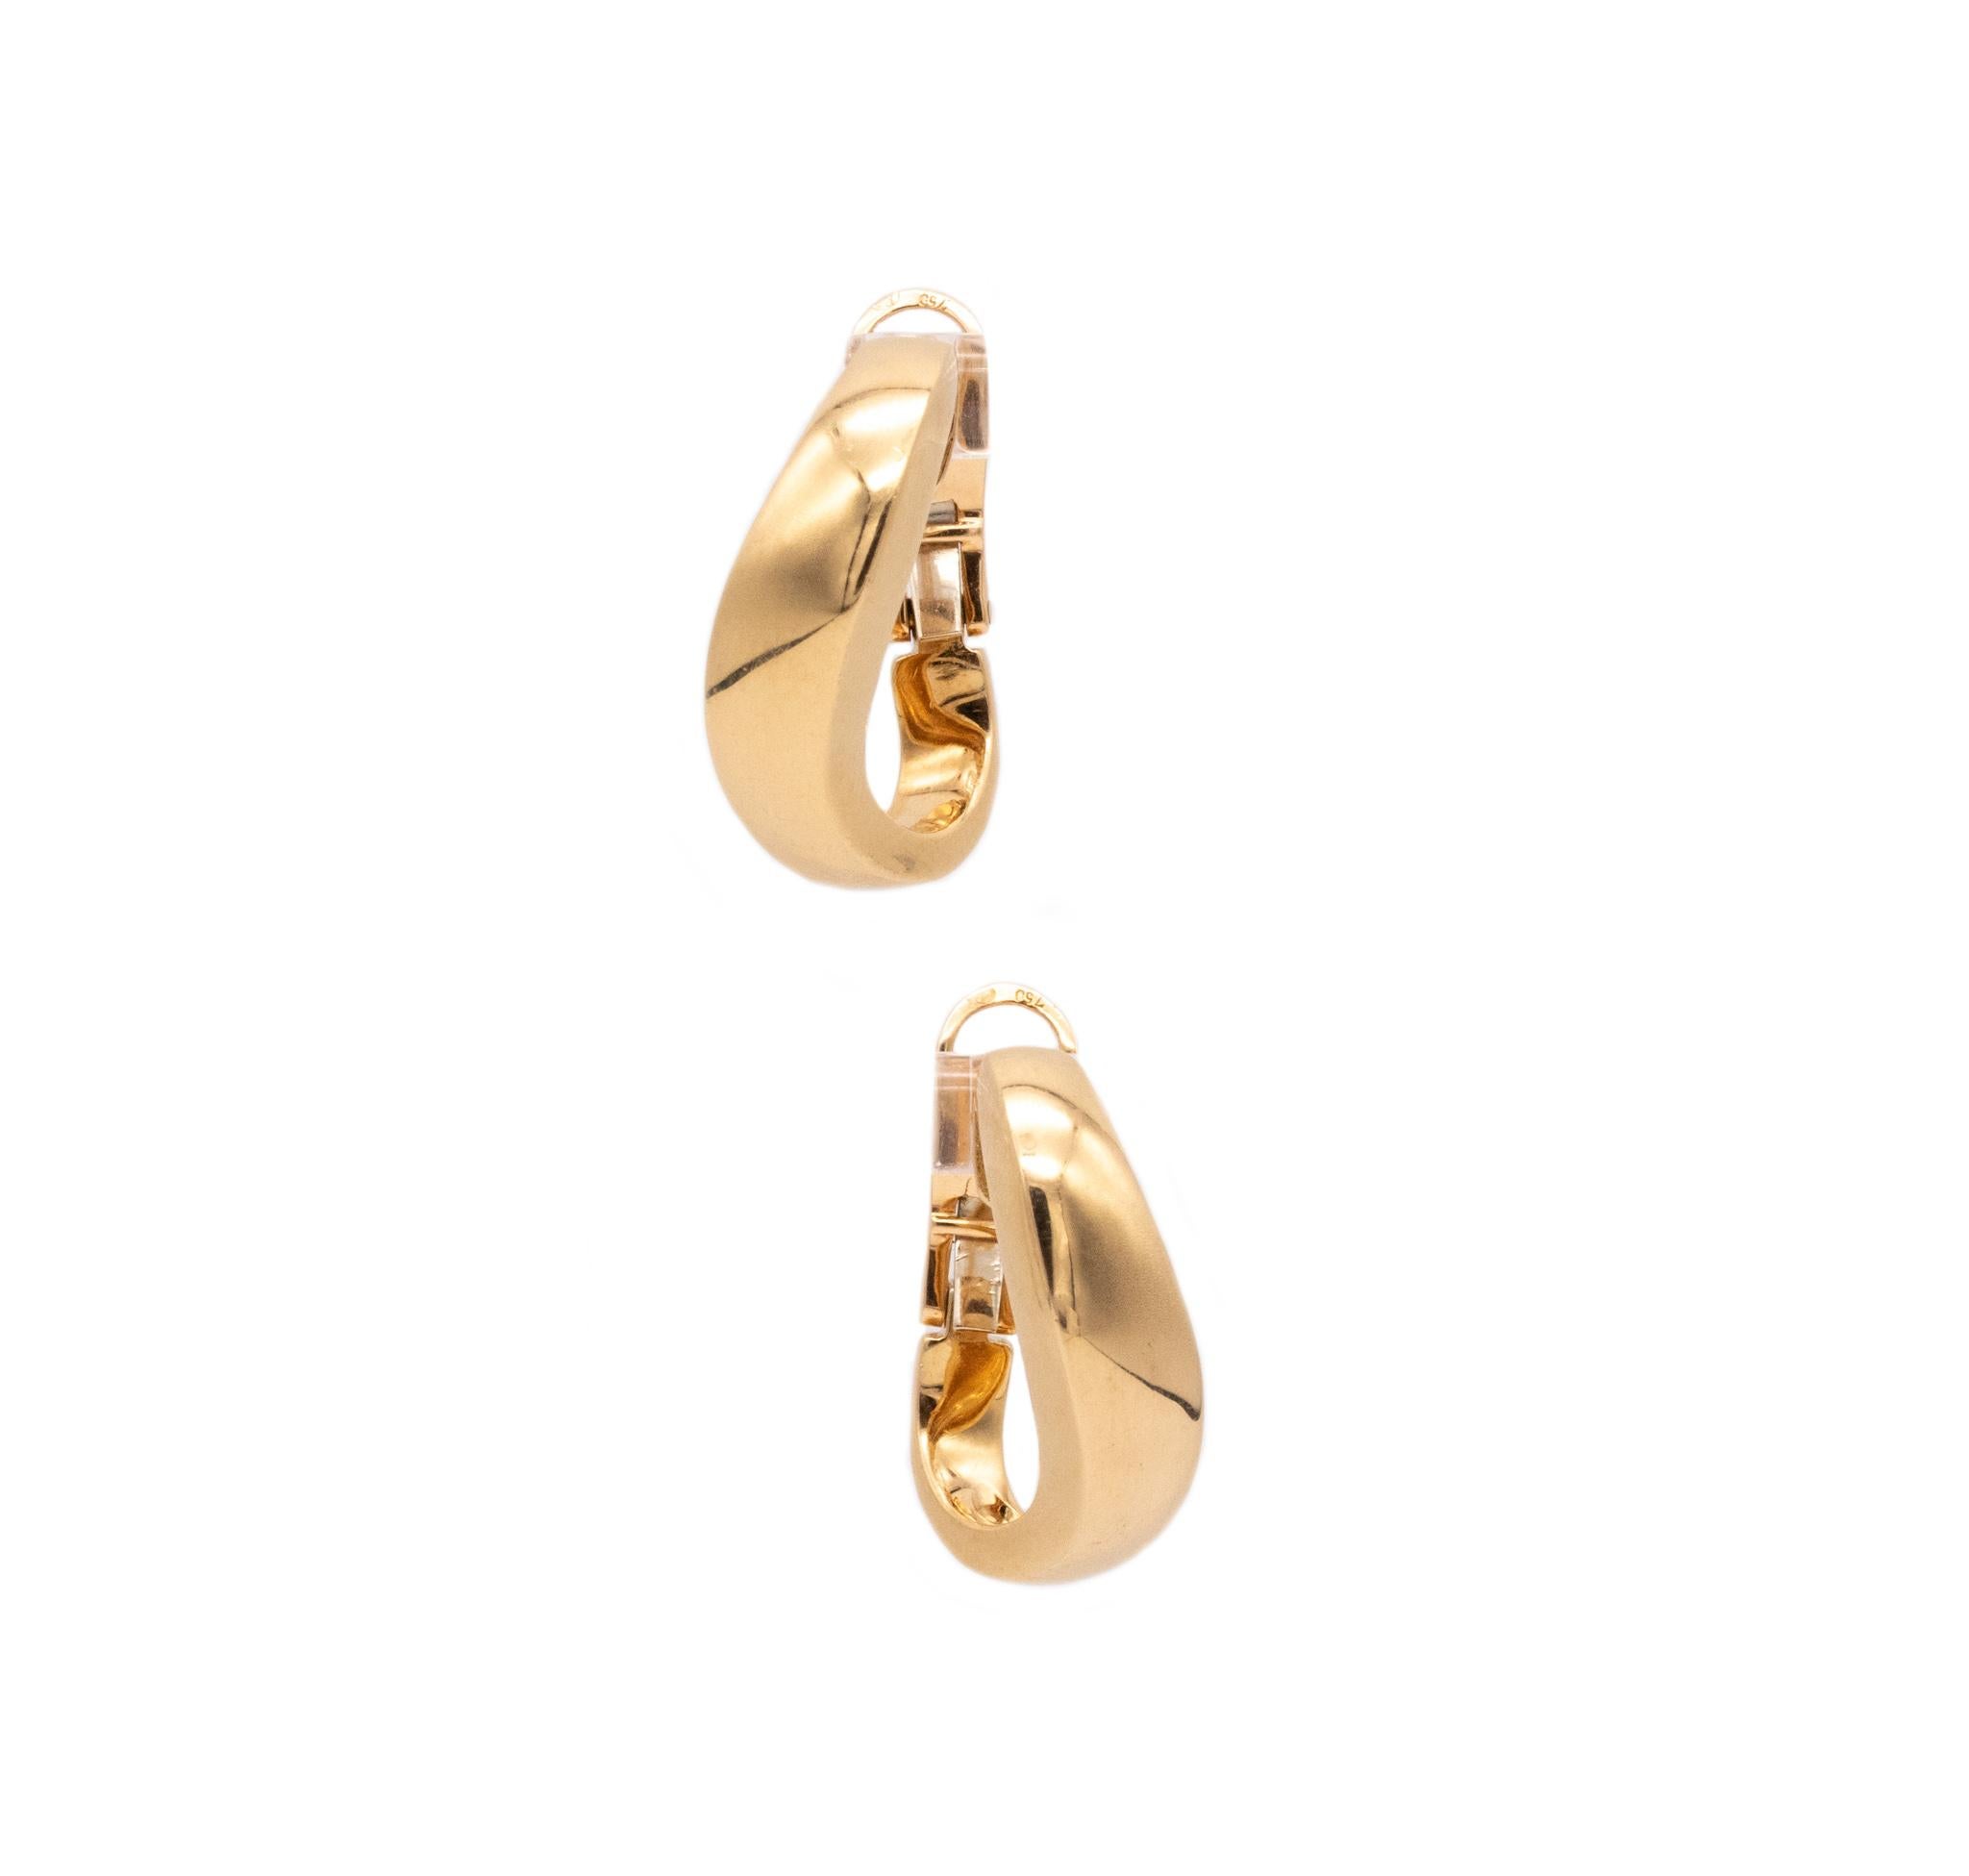 Chaumet Paris Modernist Hoop Clip-On Earrings in Solid 18Kt Yellow Gold 2